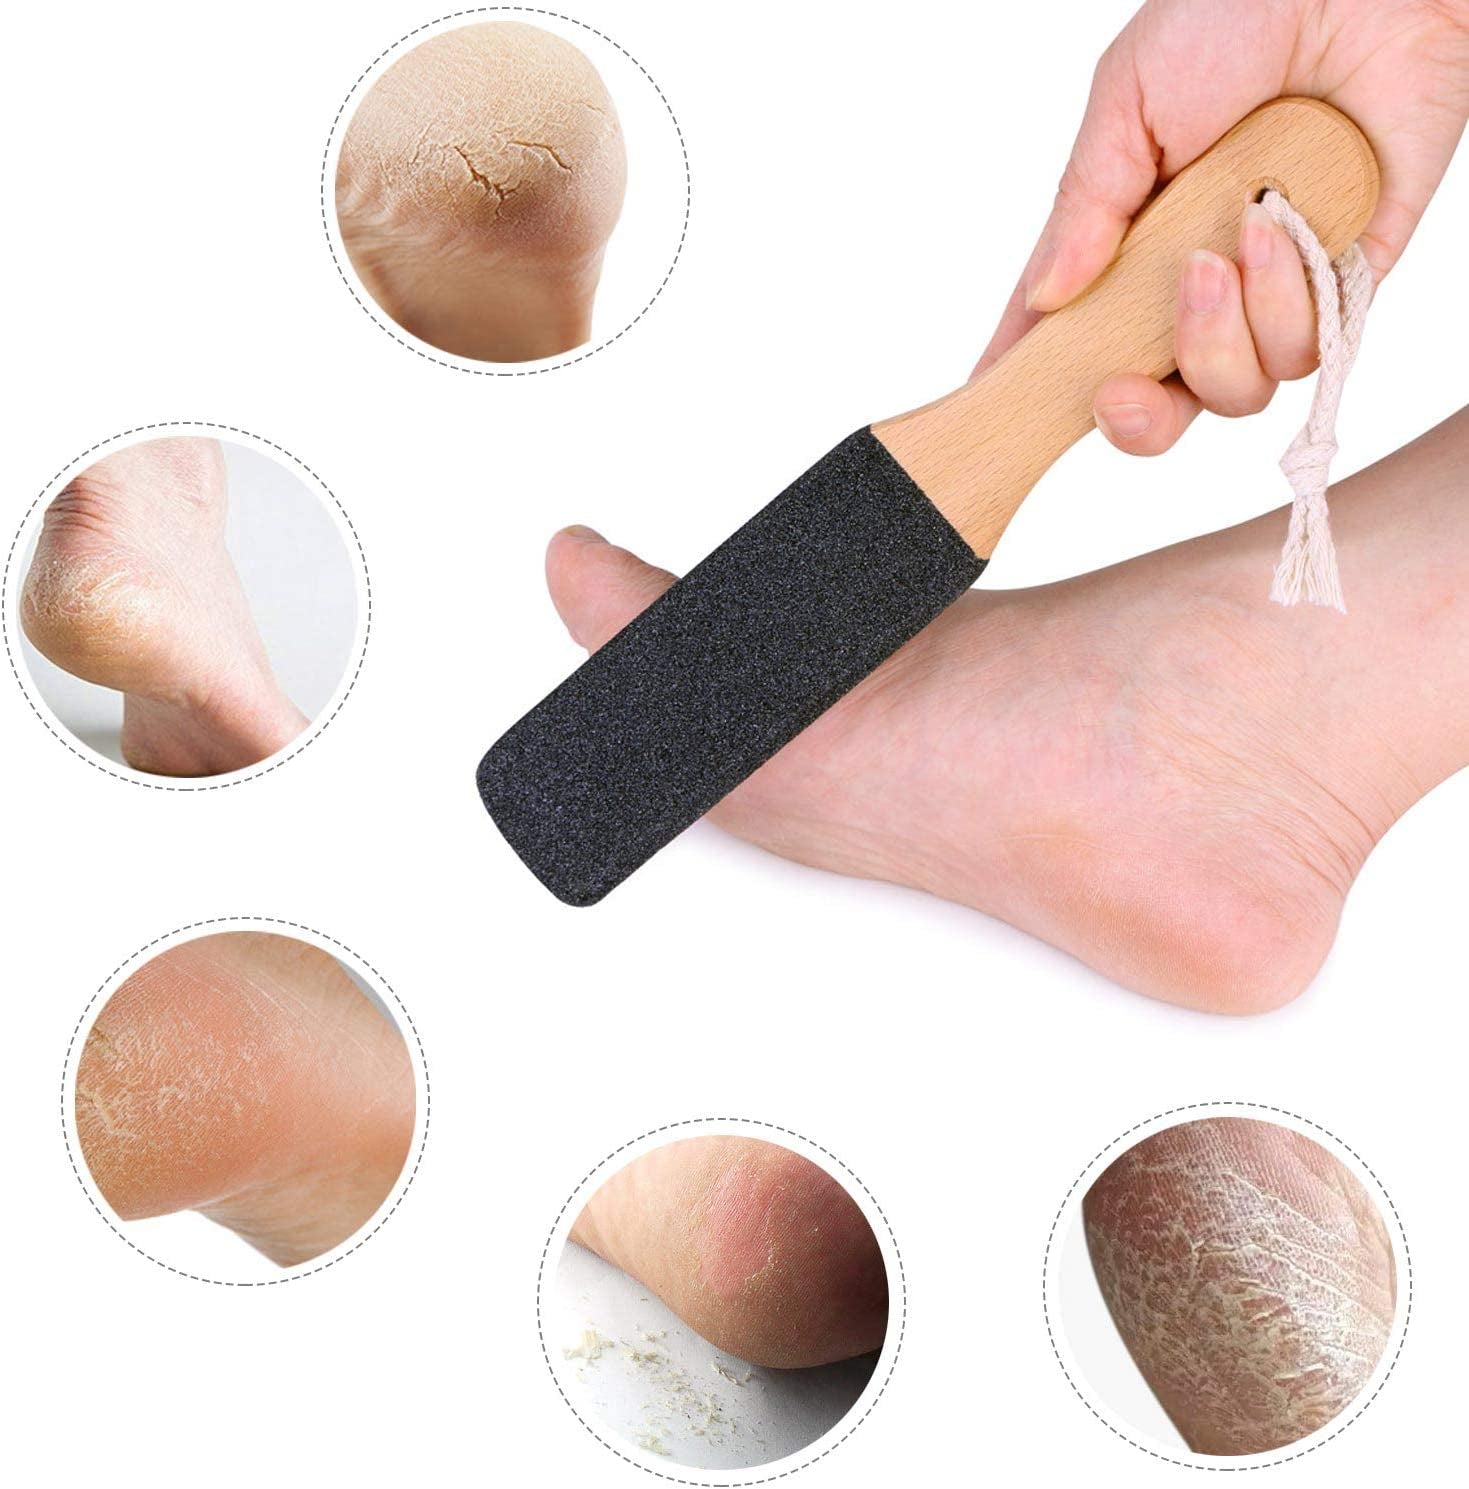 2 Pieces Foot File Callus Remover Heel Grater Wooden Handle Foot Scrubber Pedicure File Foot Filer for Dead Skin Professional